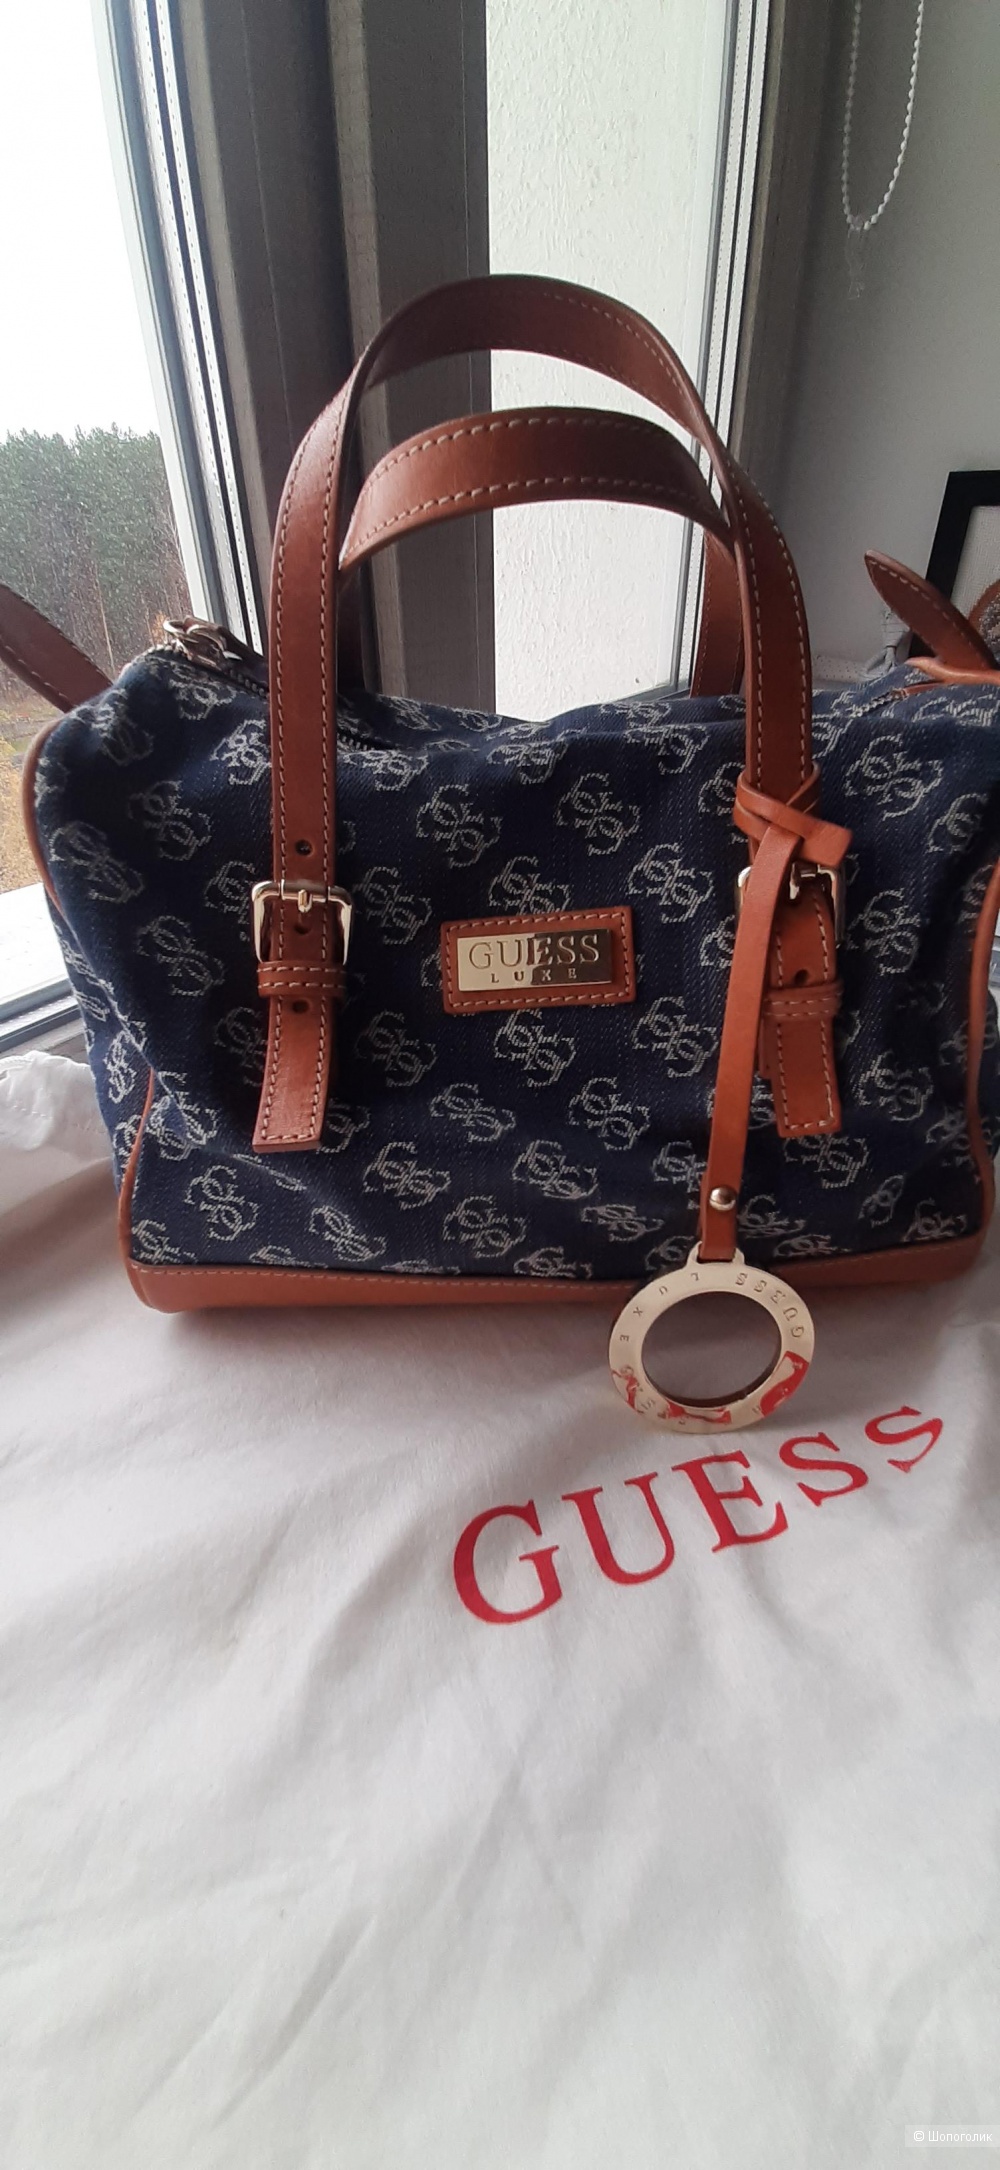 Сумочка Guess Luxe, размер S-M